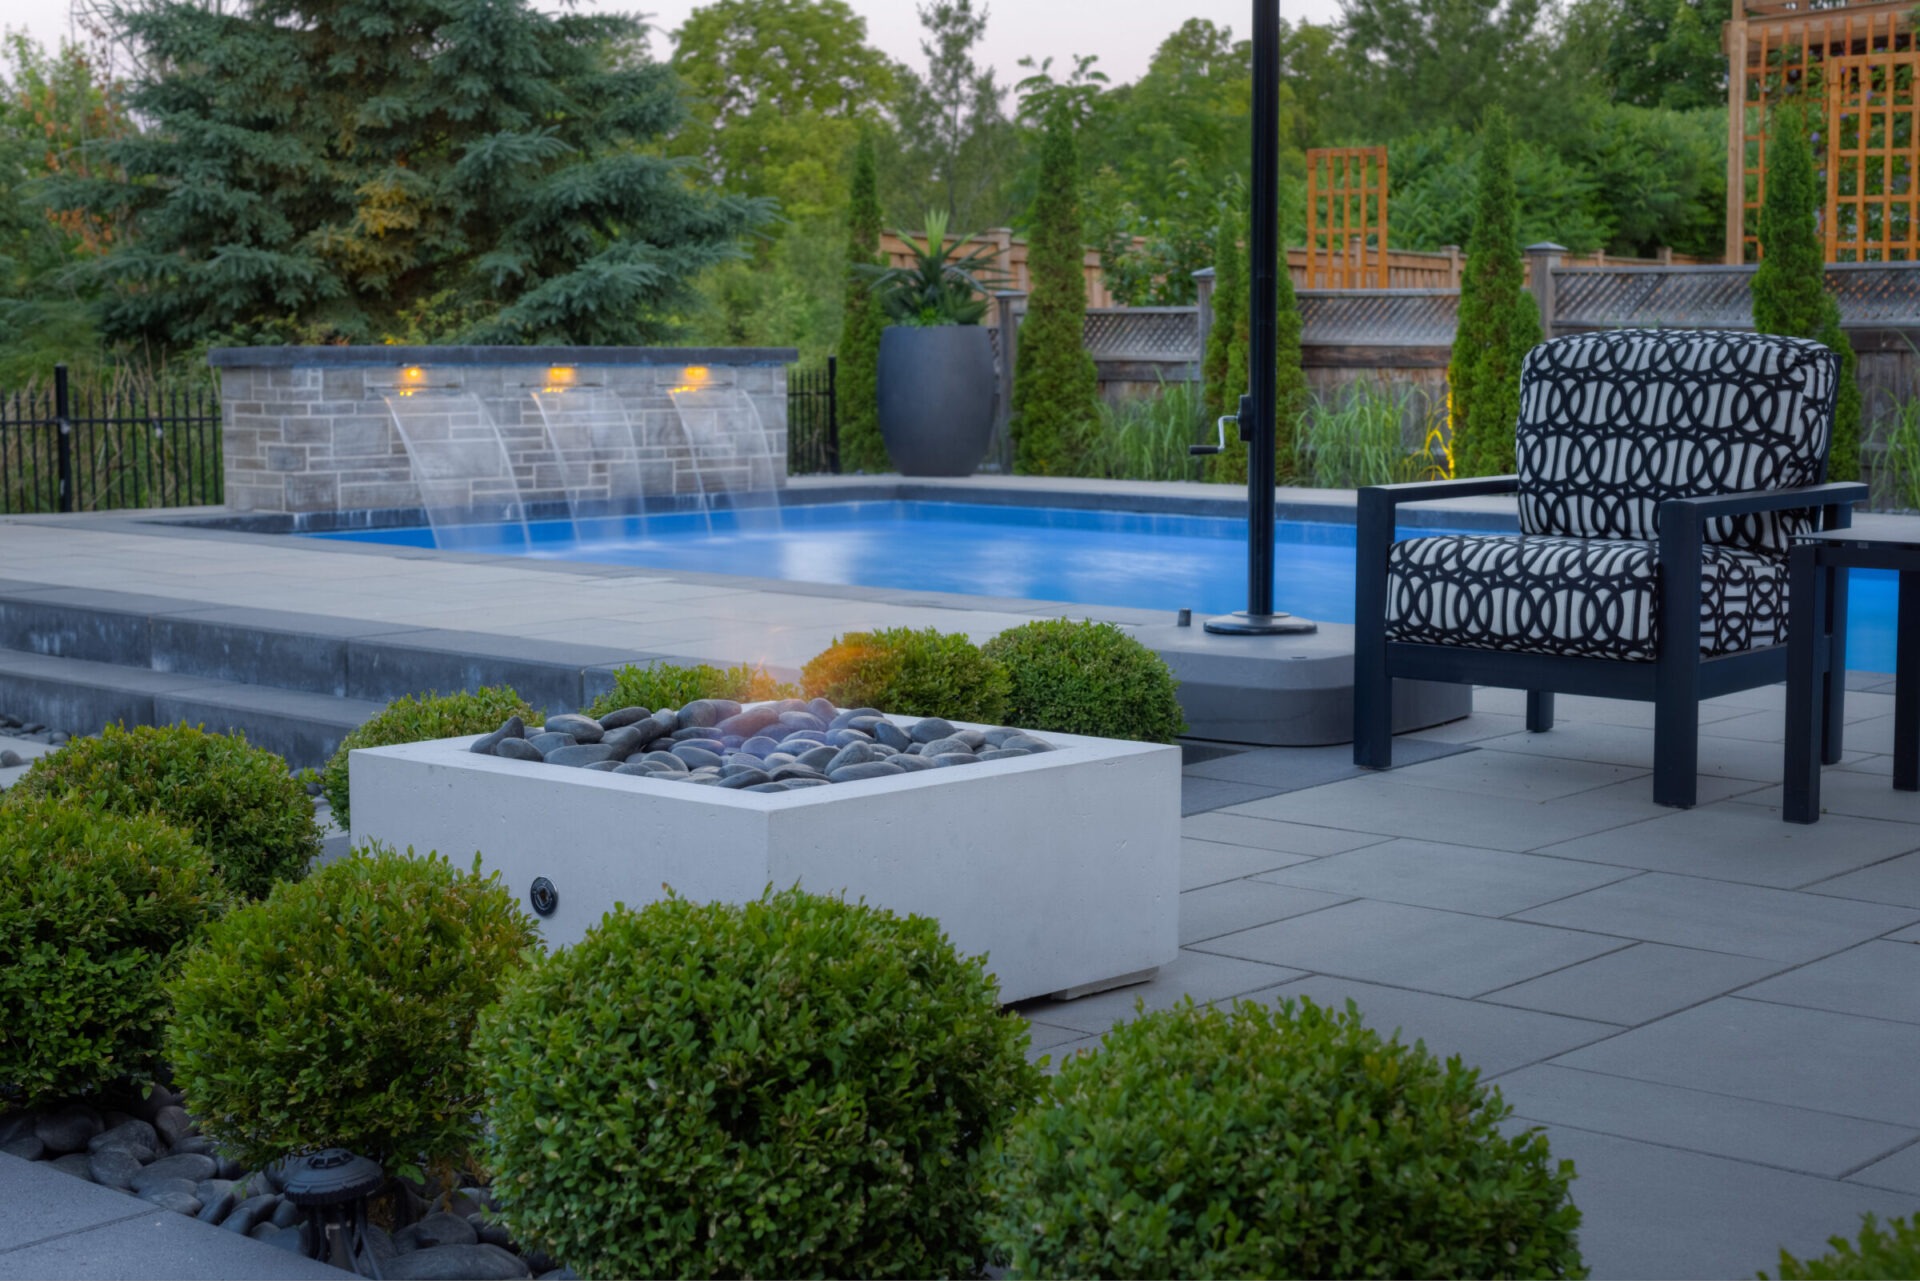 An outdoor pool area during dusk with a lit fire feature, patterned armchair, neatly landscaped bushes, and water flowing from stone pool walls.